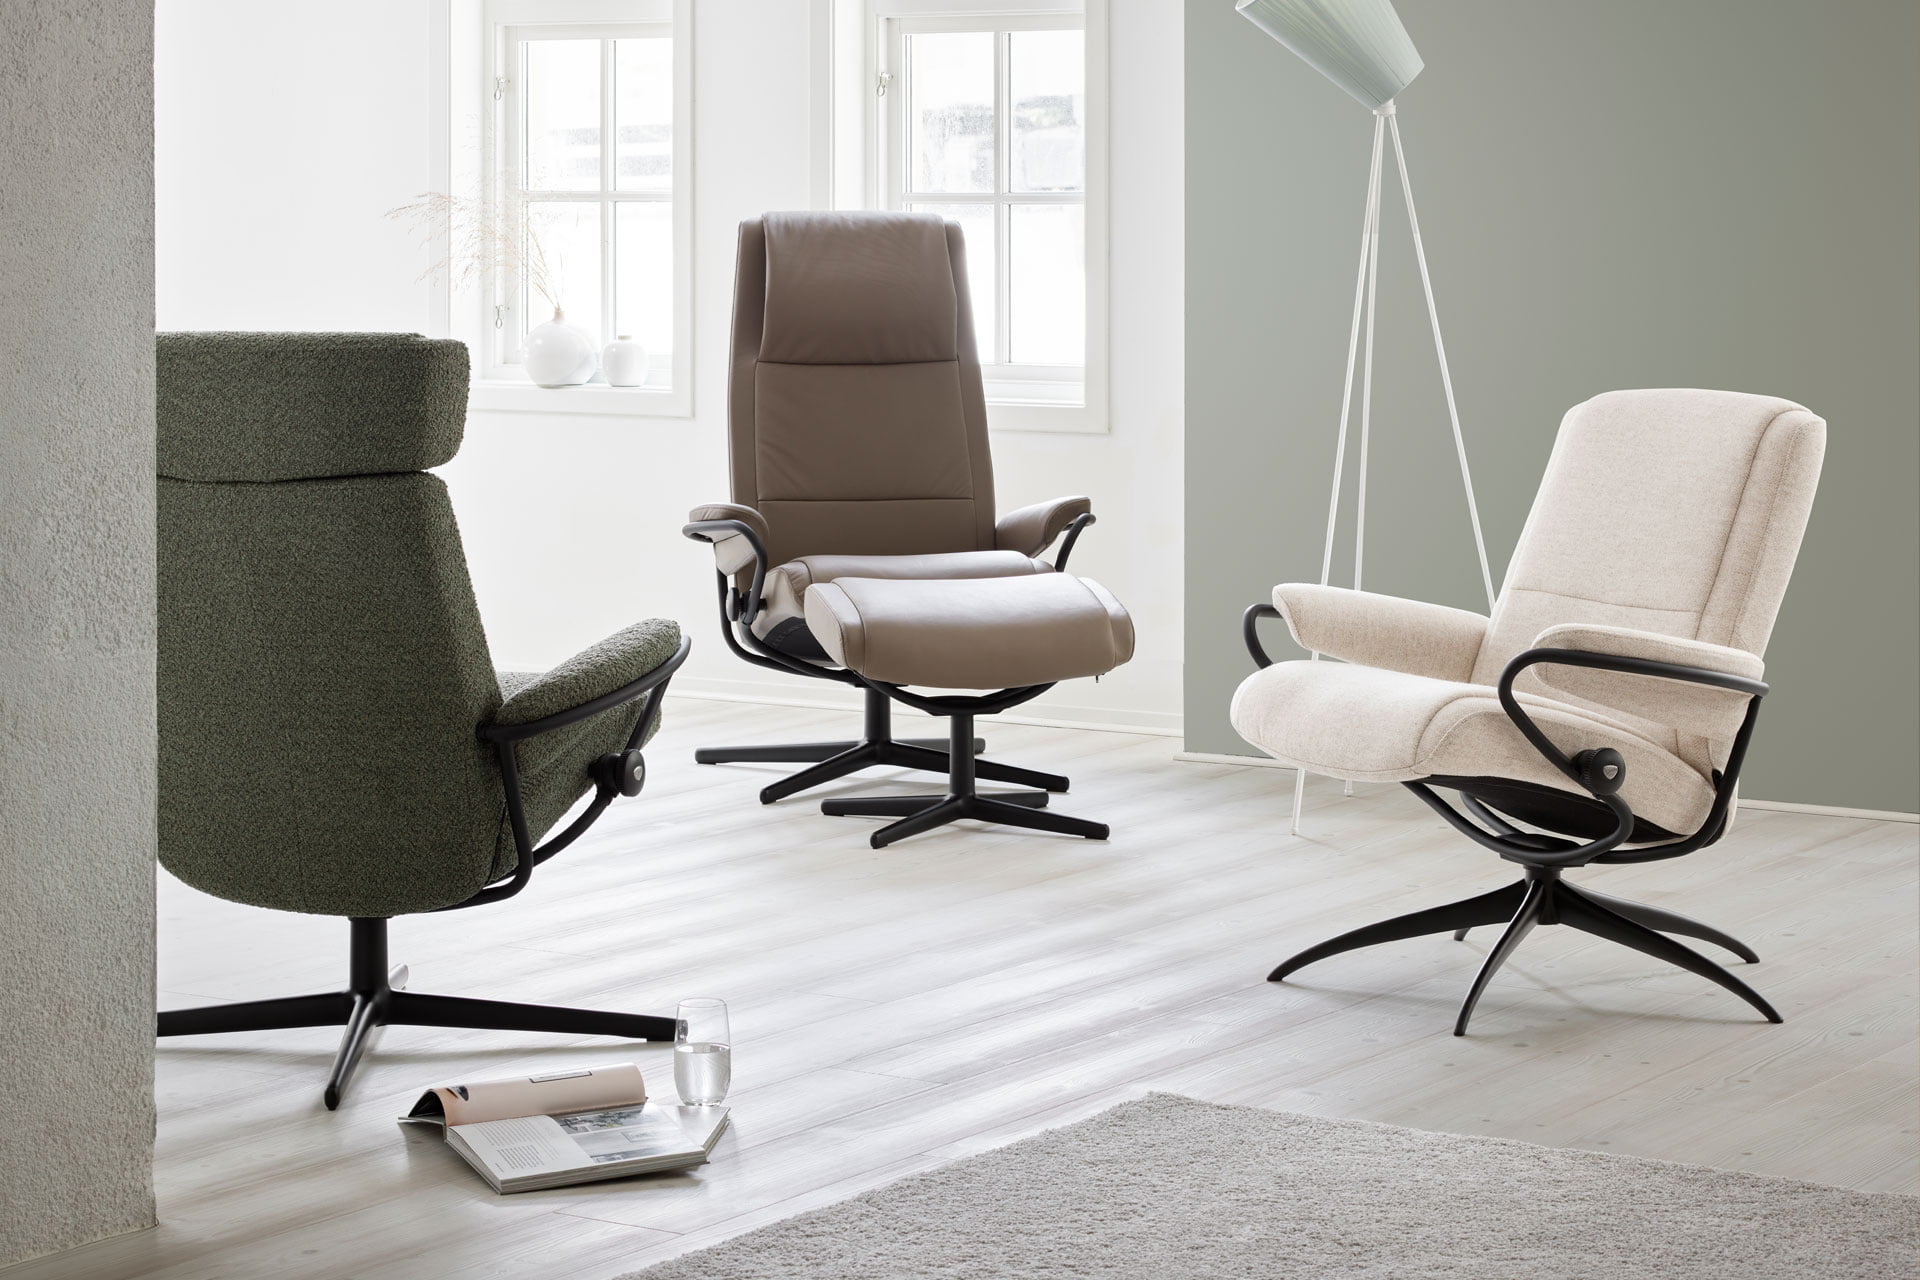 Stressless Paris shown with different bases